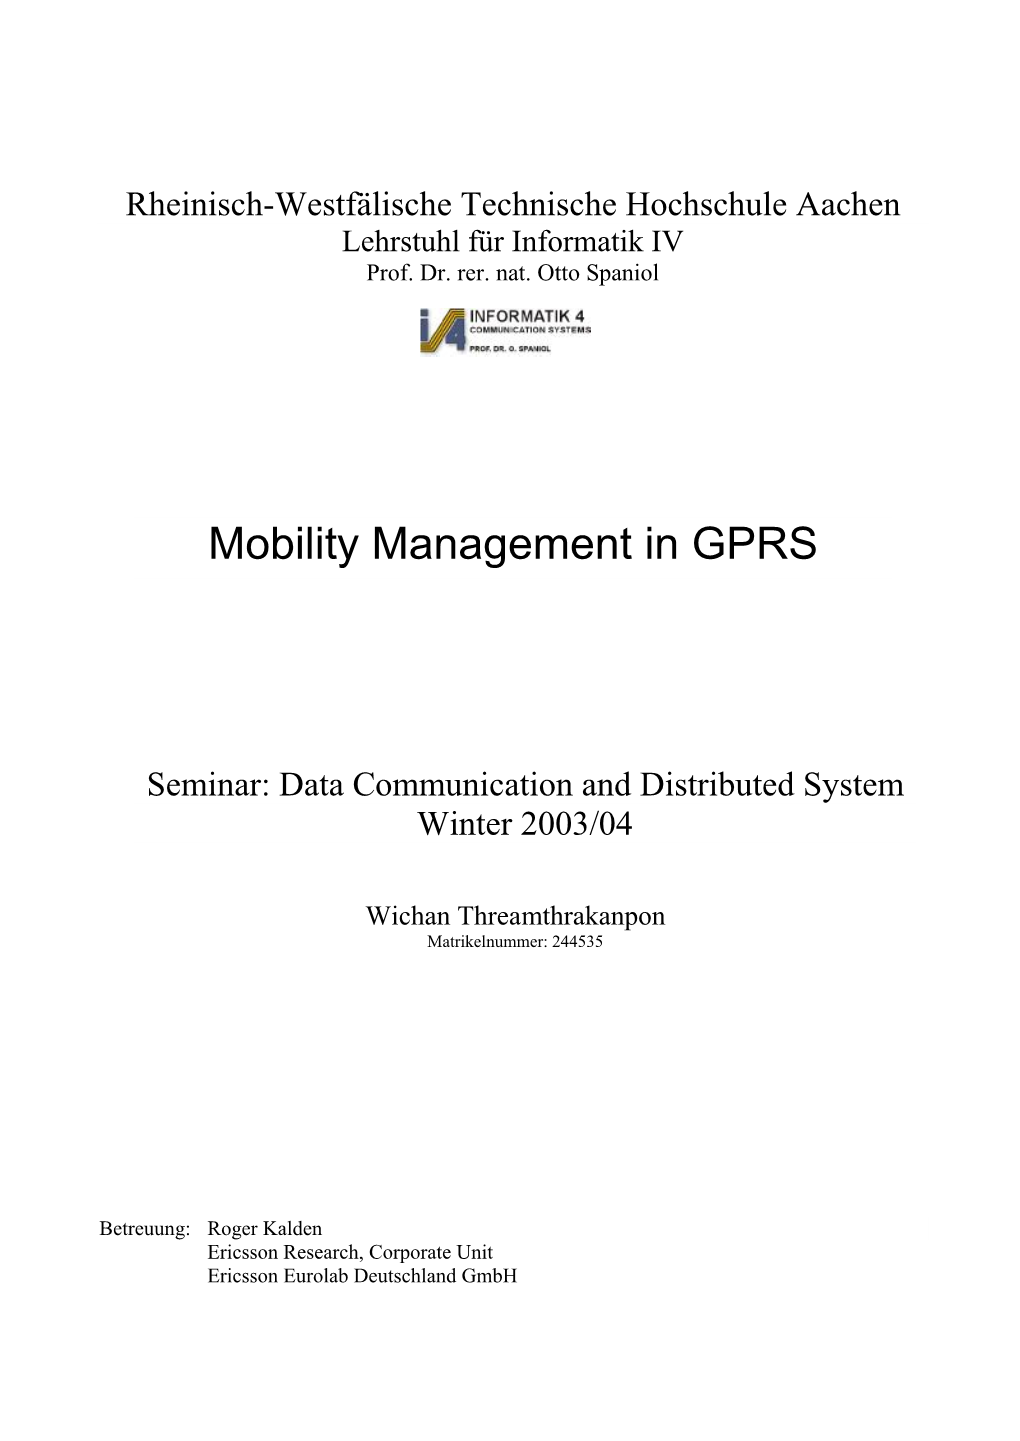 Mobility Management in GPRS